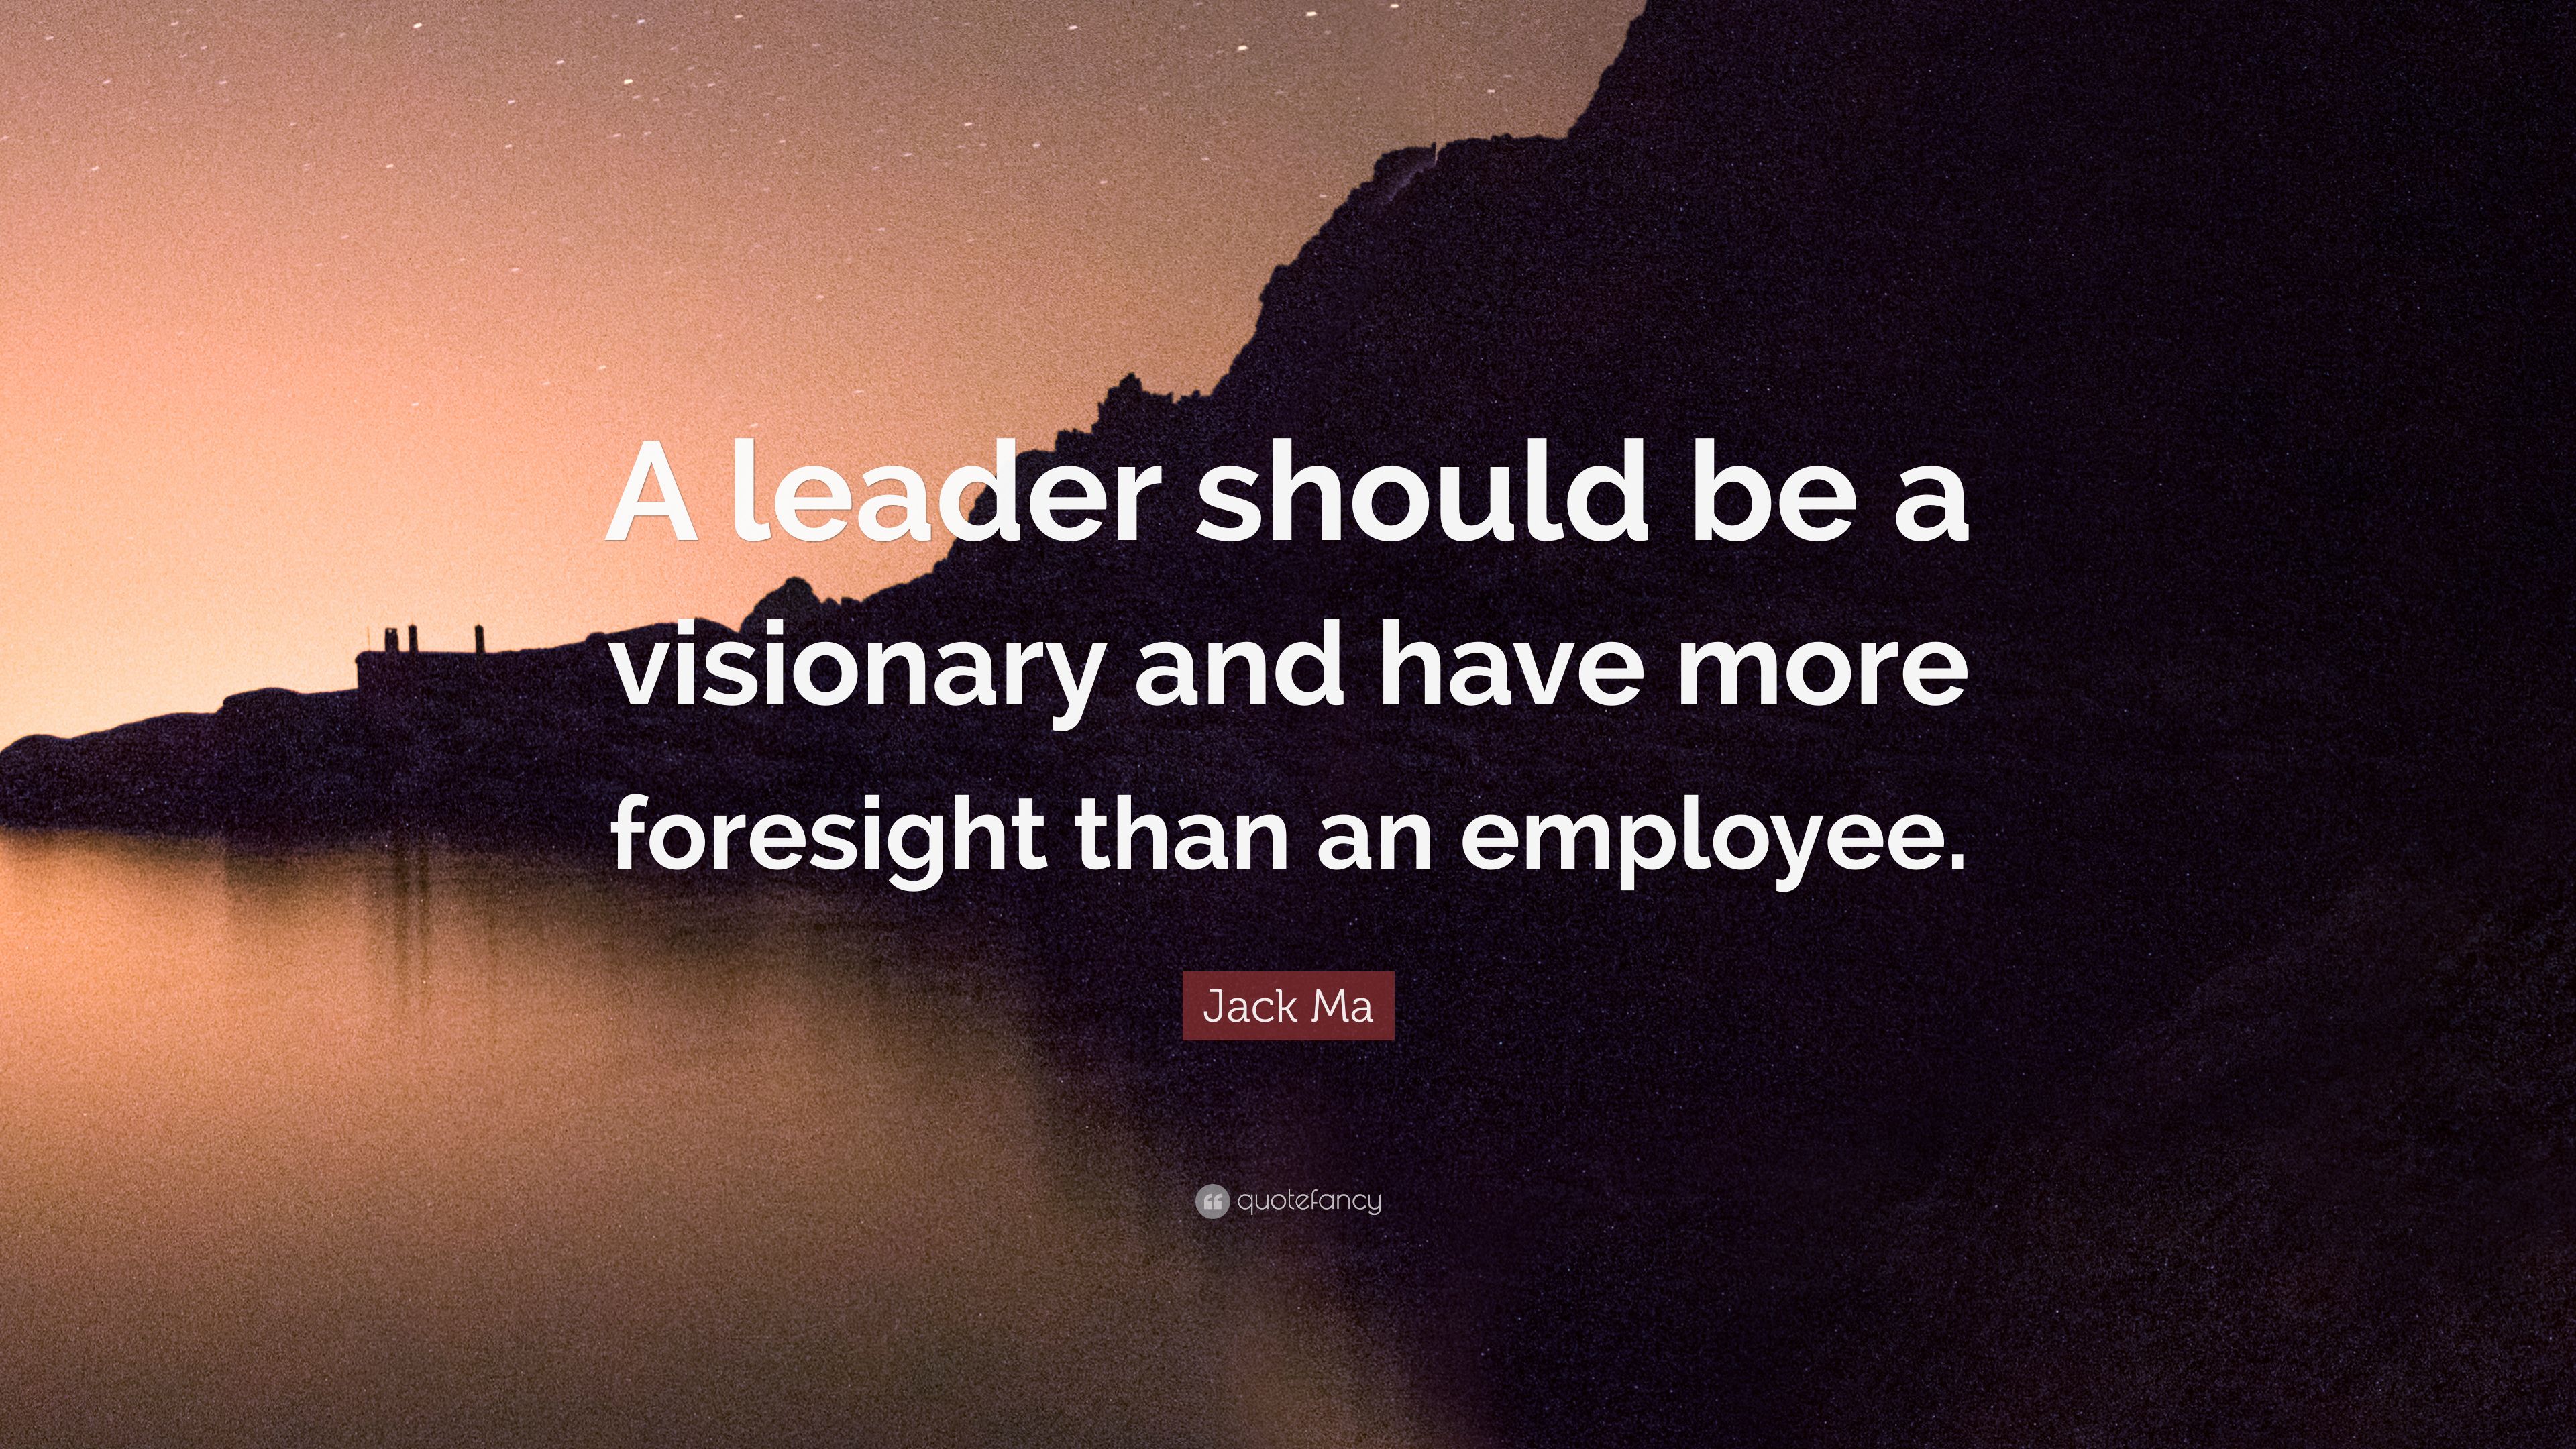 Jack Ma Quote: “A leader should be a visionary and have more